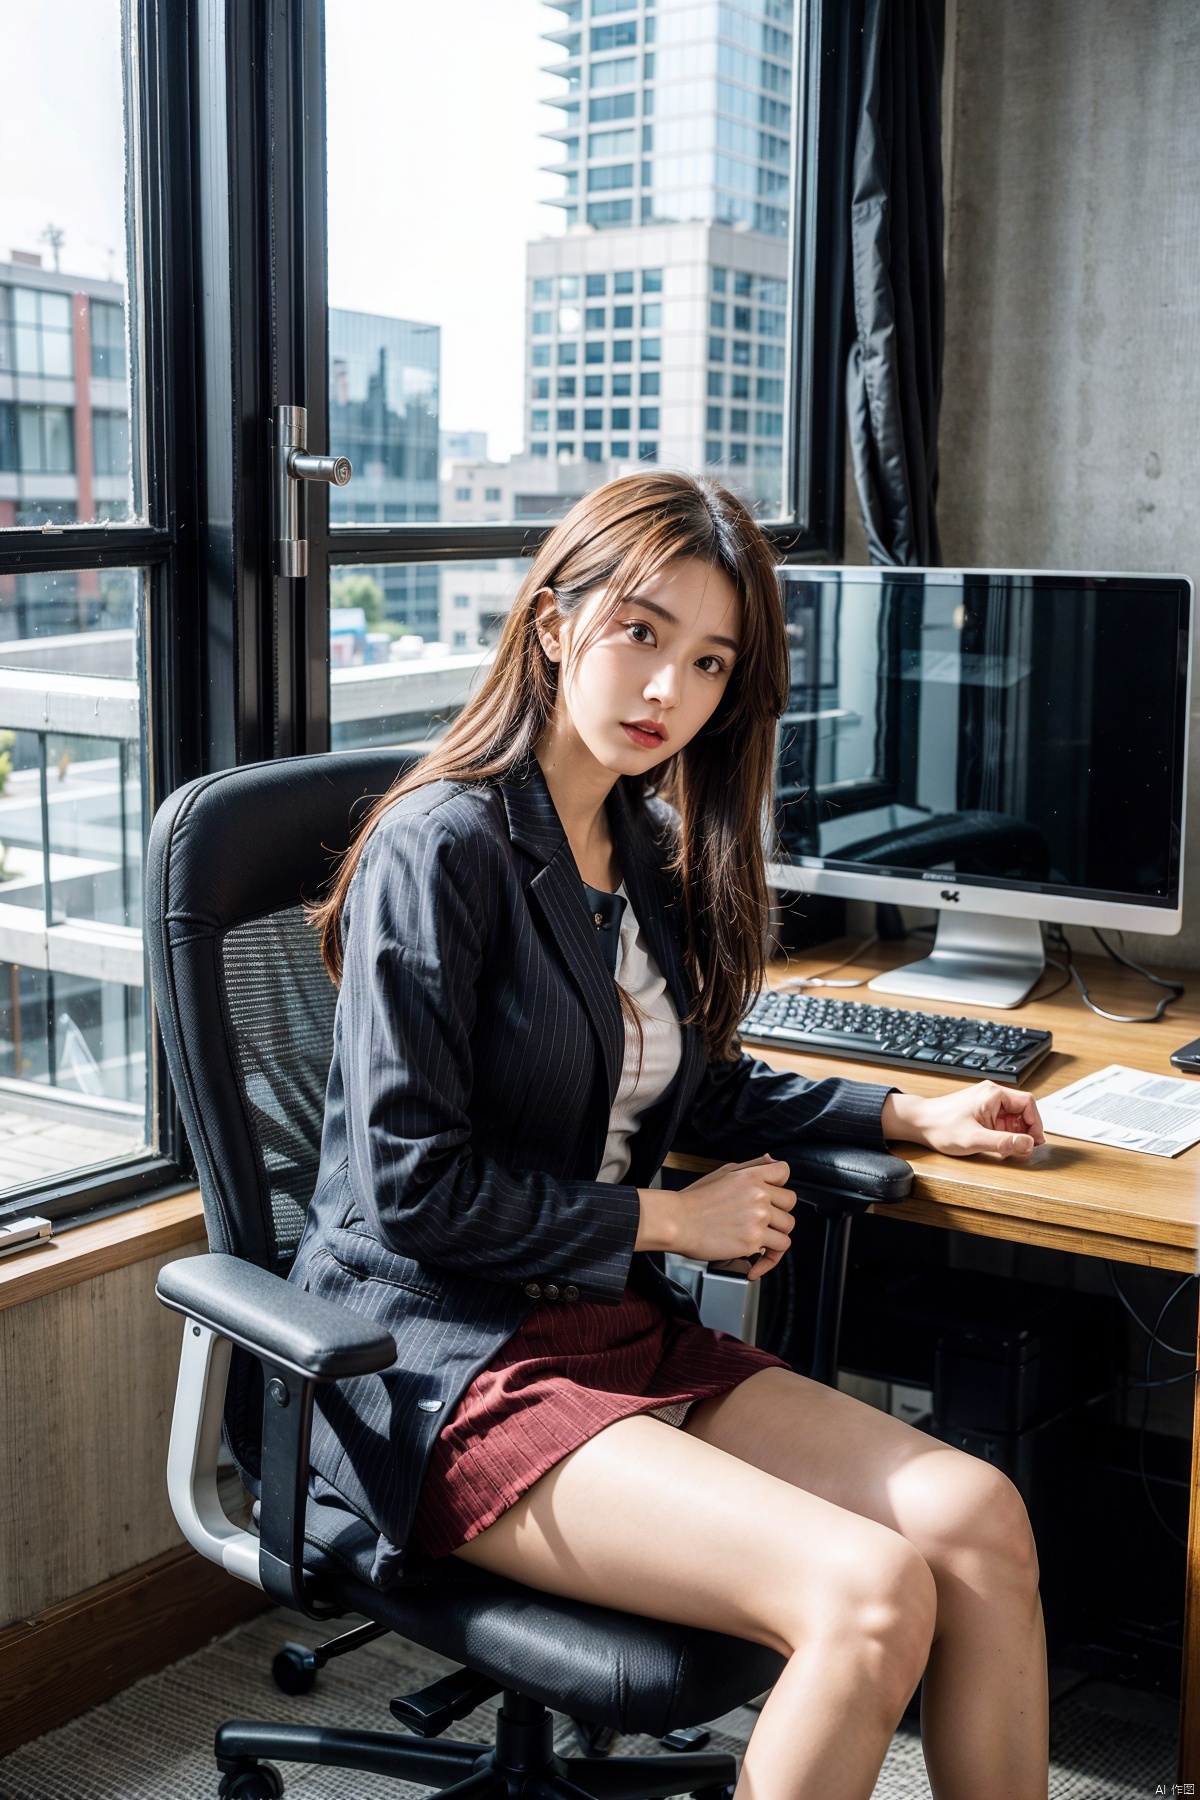  1 girl sitting on an office chair,Computer,(European model:1.3),31 years old,delicated,Business womenswear,(jaket:1.1),(The shirt:1.1),(Wrap skirt:1.1),jewelry,Hosiery,Stockings,black lence stockings,goosebumps,Goose - meat,（Fidelity：1.3）,filigree,quality,（tmasterpiece：1.2）,（Fidelity：1.2）,（best qualtiy）,（skin detailed：1.3）,（Complicated details）,dramatics,Ray traching,photore,Bathed in shadows,visual novel,The boss's office for a skyscraper,window with view on the city,filmgrain,depth of fields, 1girl,high_heels,pinstripe_suit